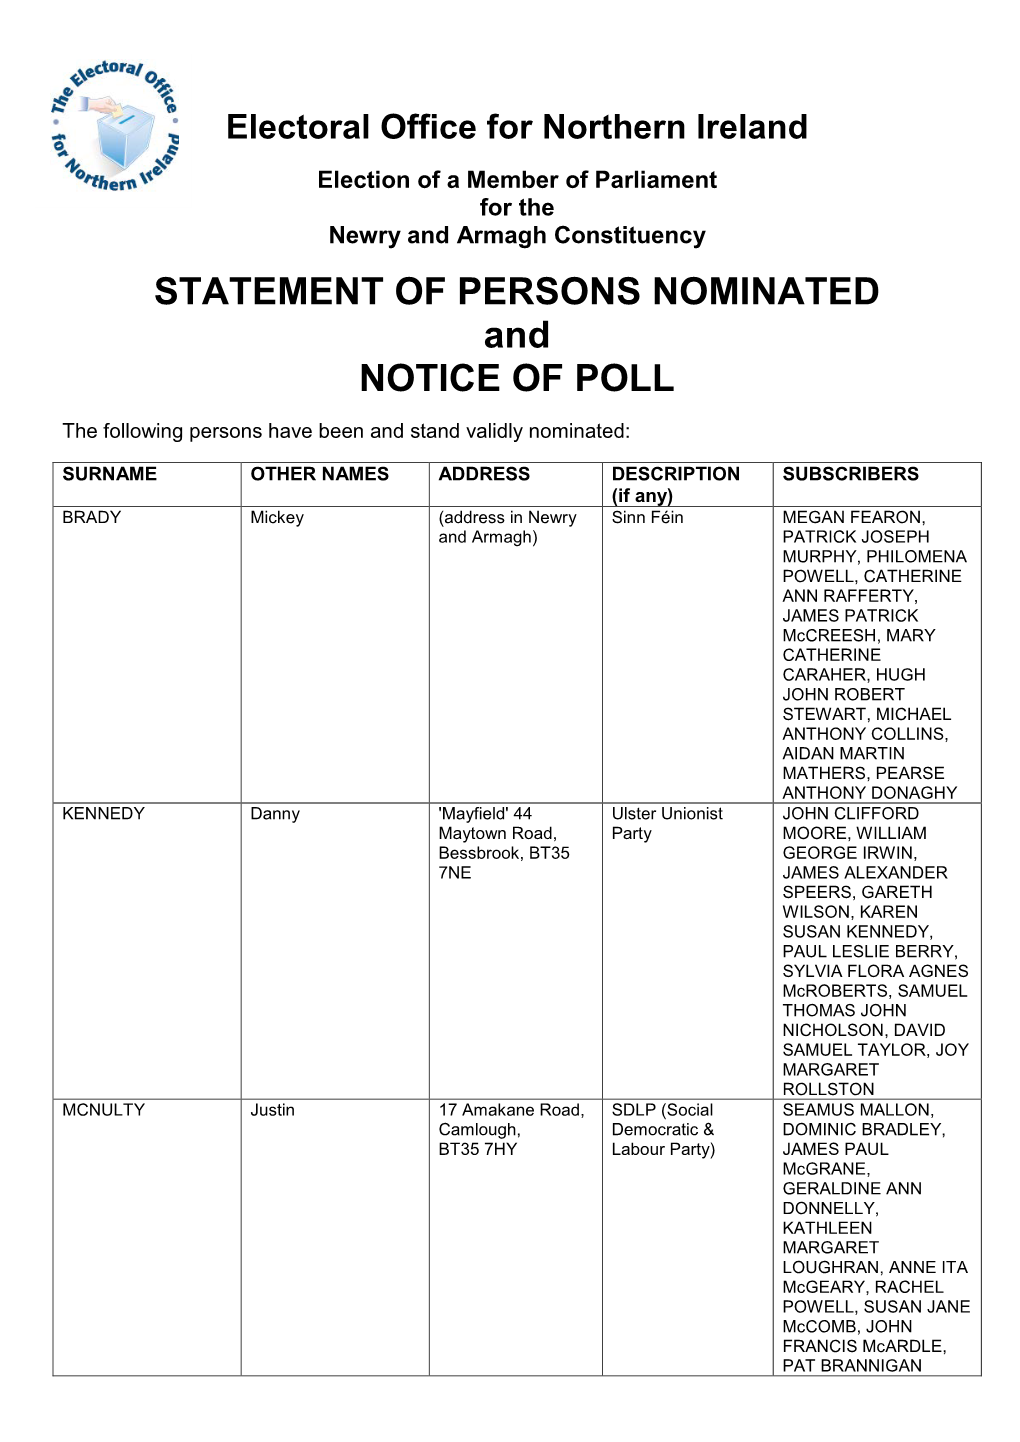 STATEMENT of PERSONS NOMINATED and NOTICE of POLL